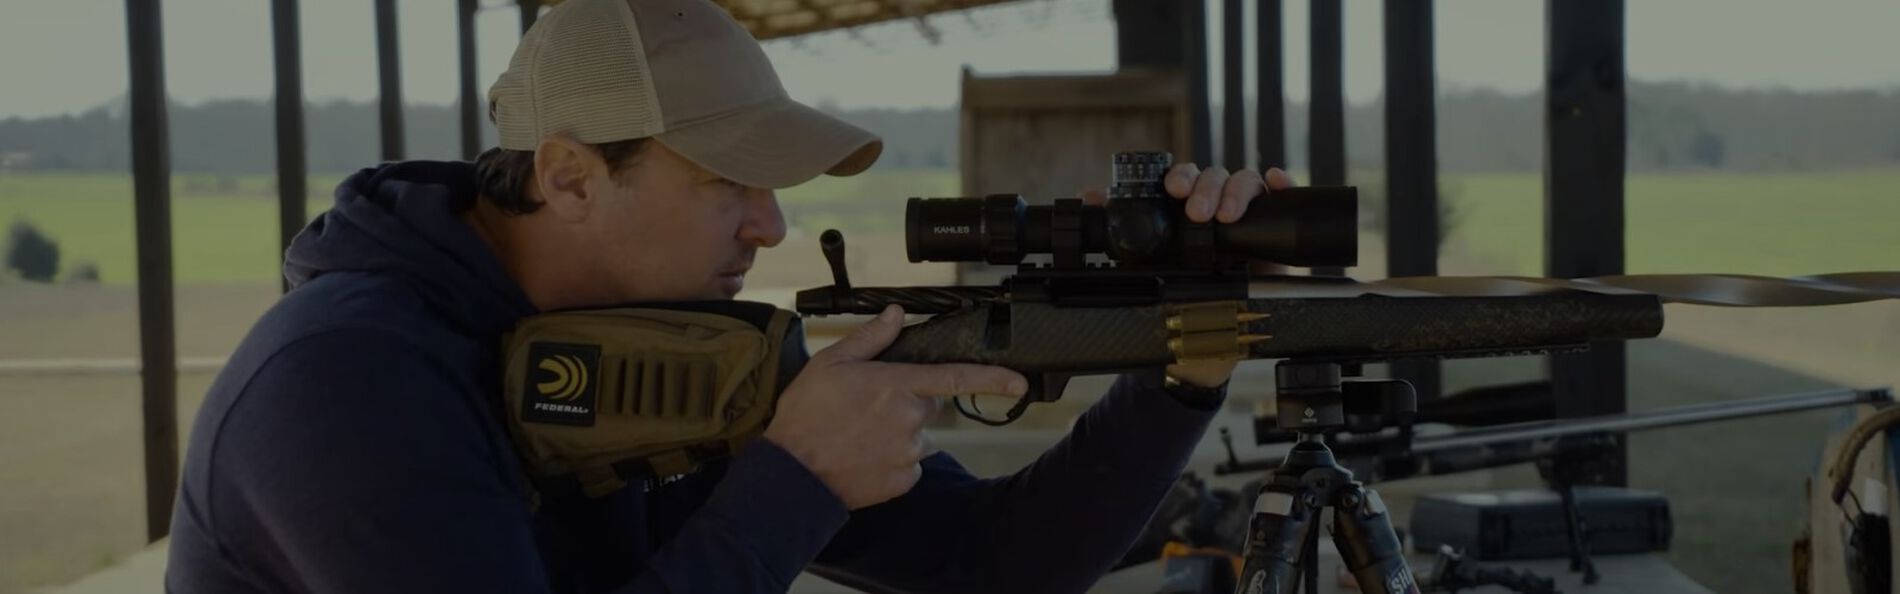 Jim Gilliland looking down the scope of a rifle resting on a tri-pod